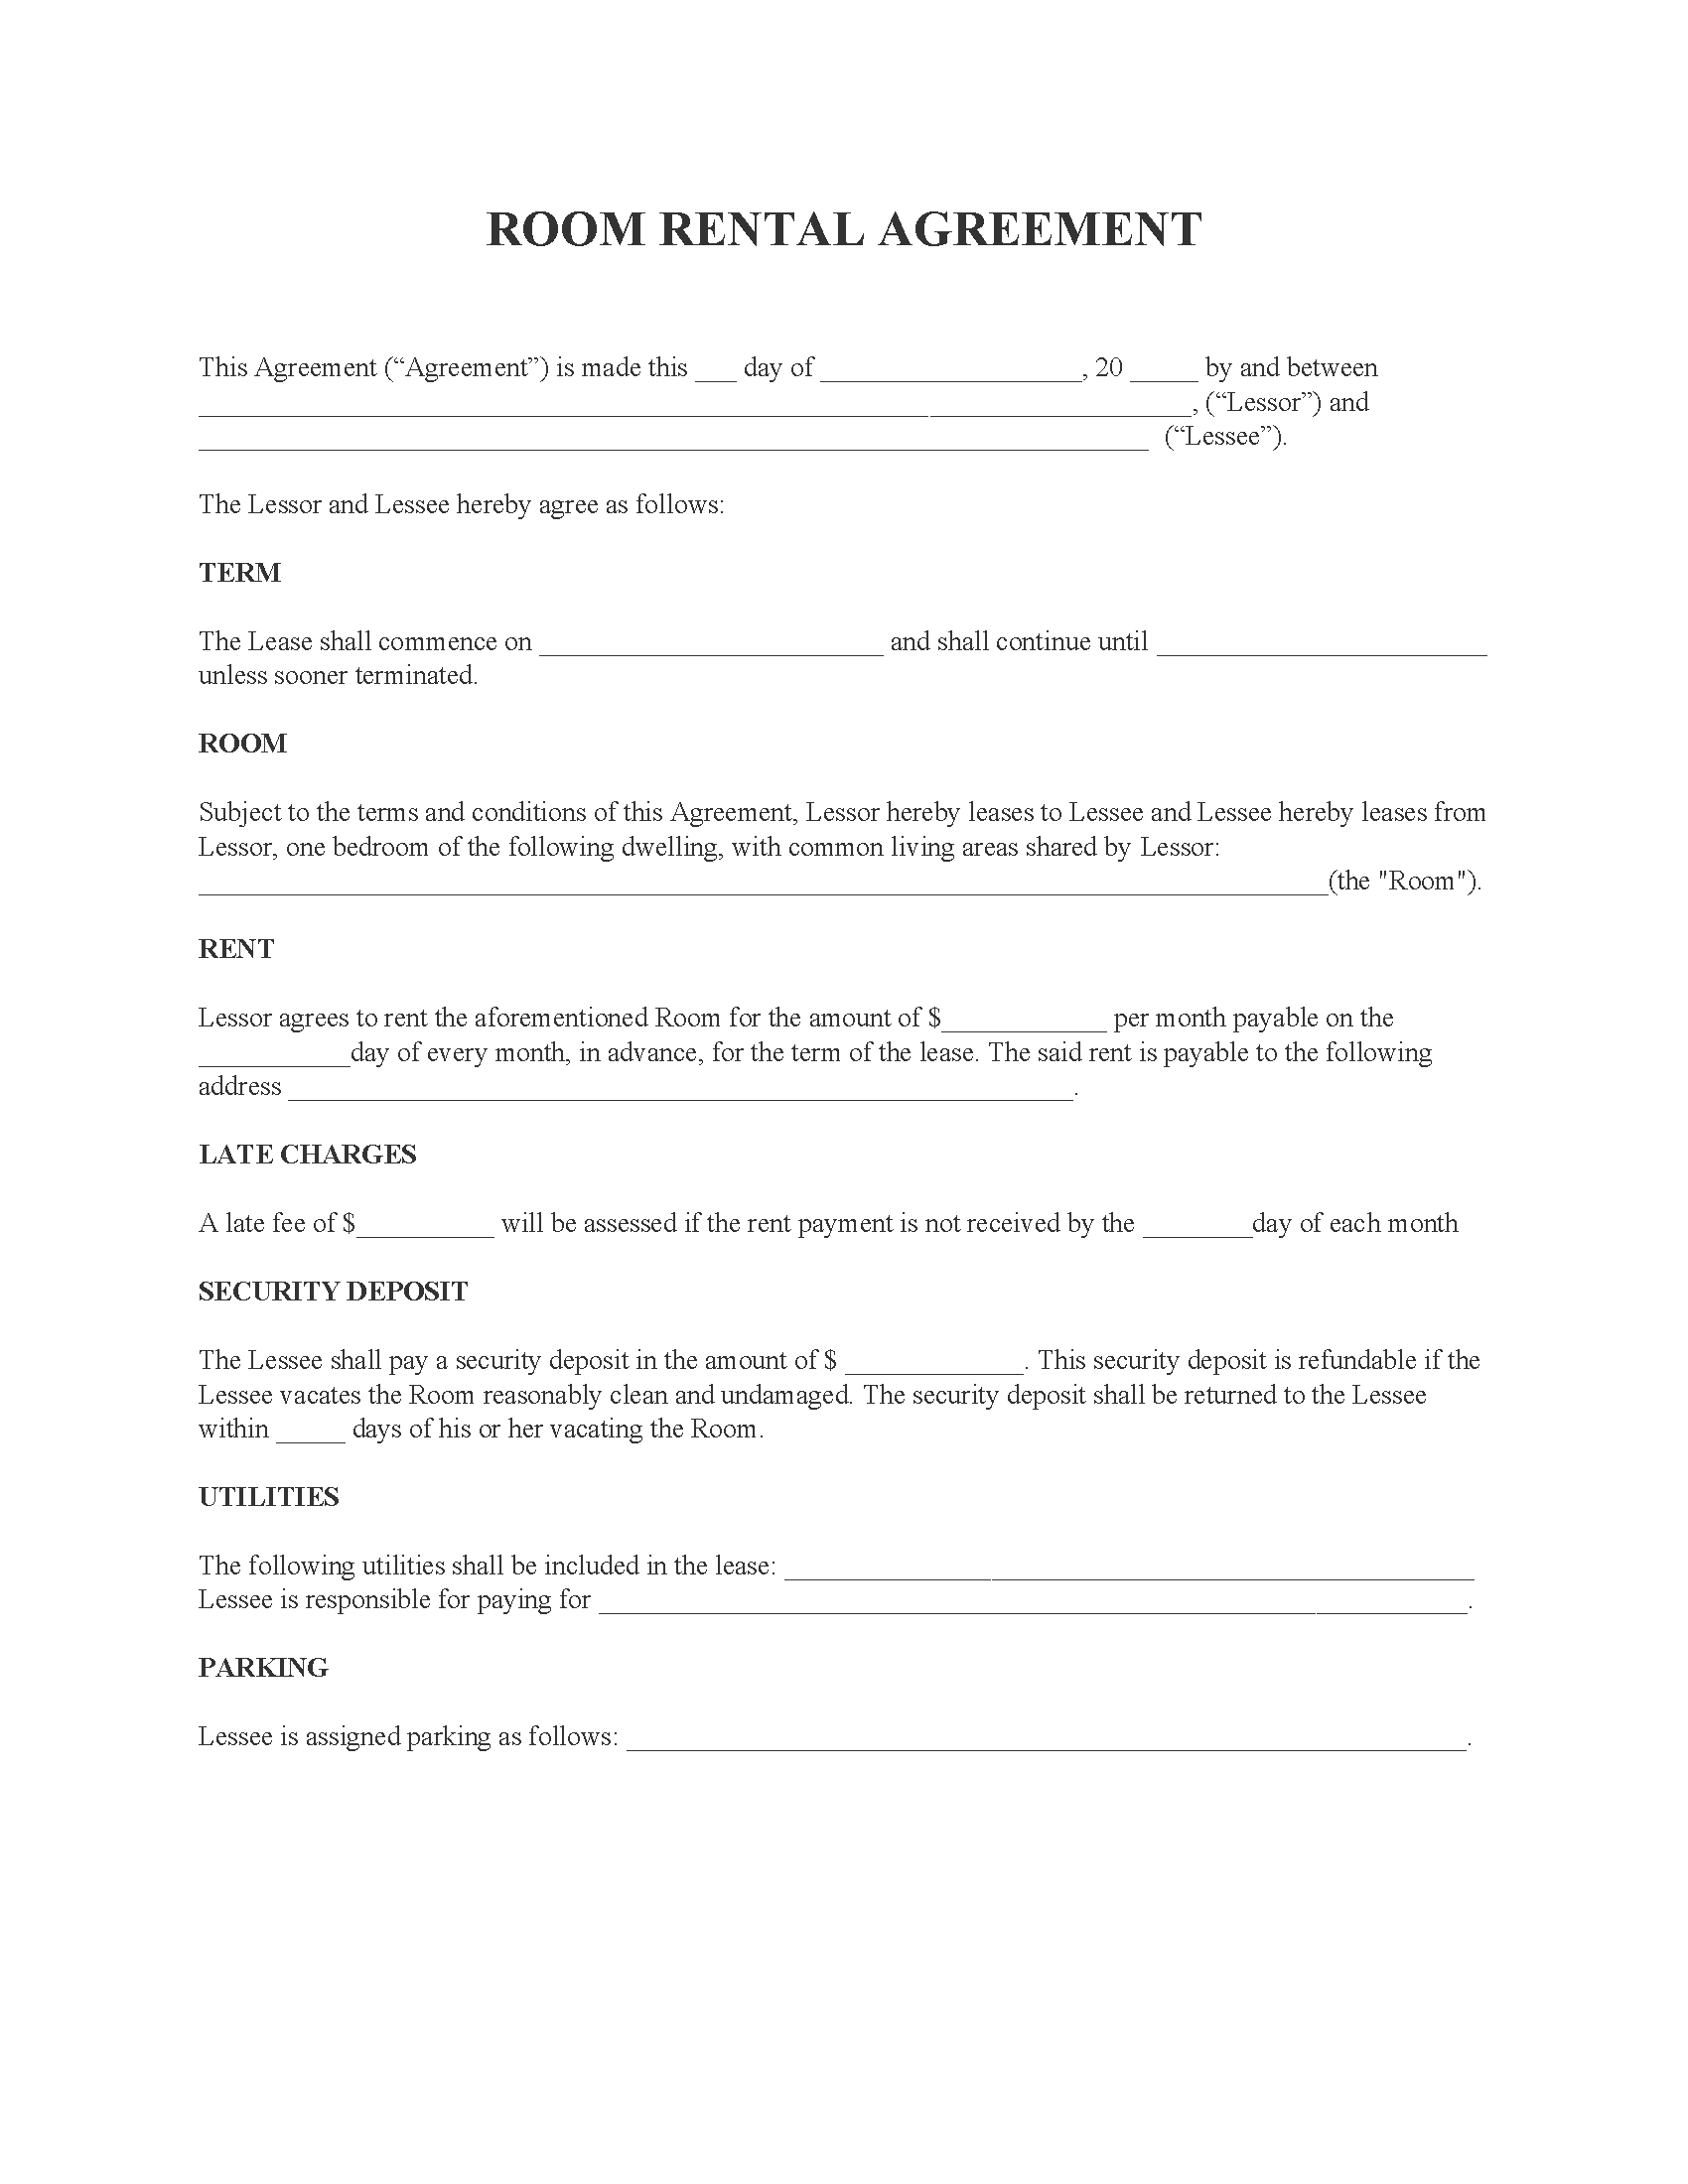 residential-rental-agreement-fillable-pdf-free-printable-legal-forms